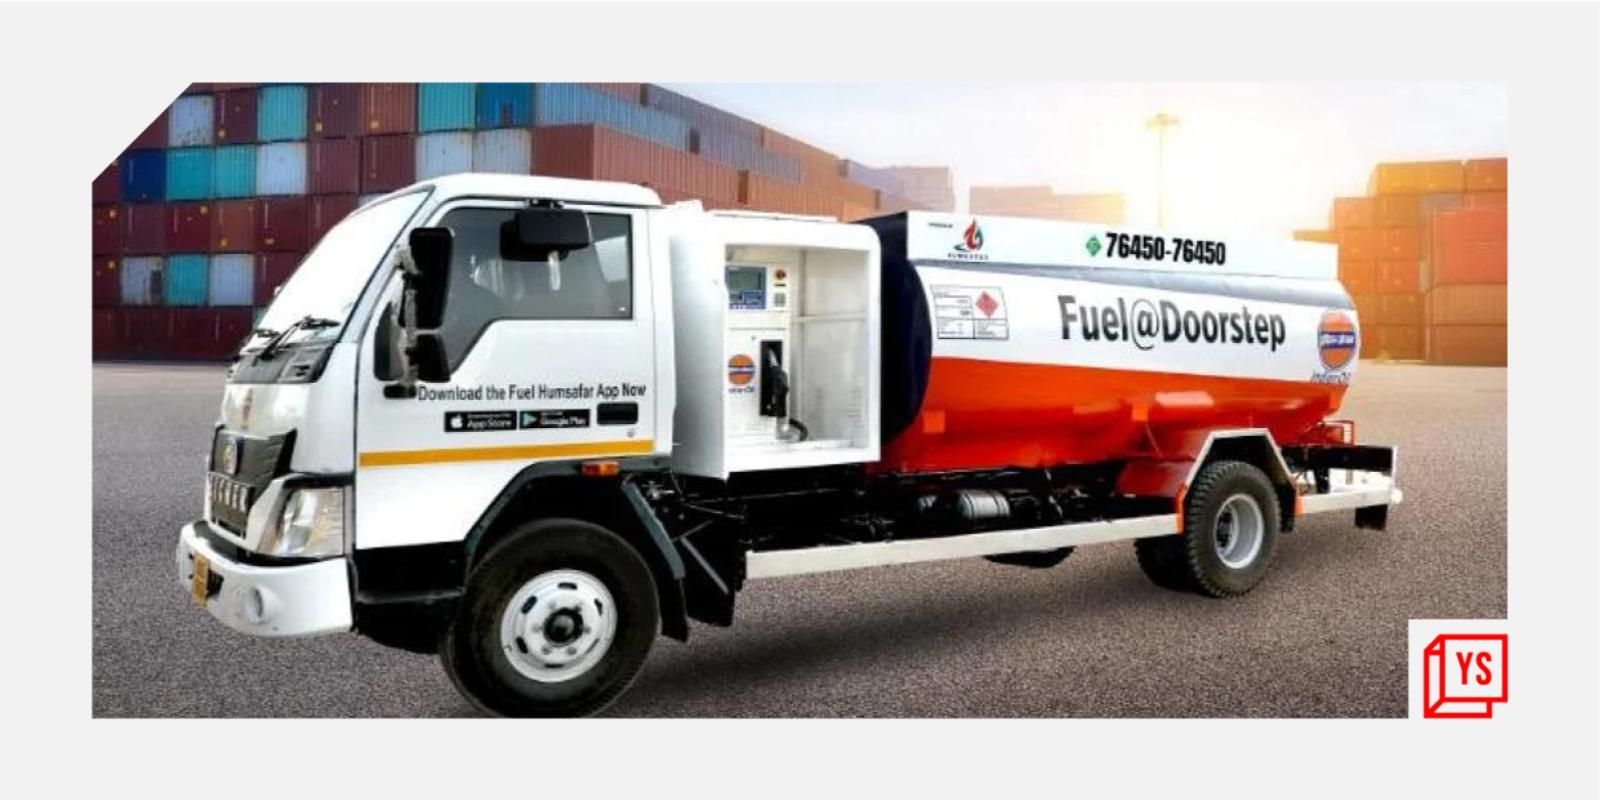 5 on-demand fuel delivery startups bringing petrol pumps to the doorstep